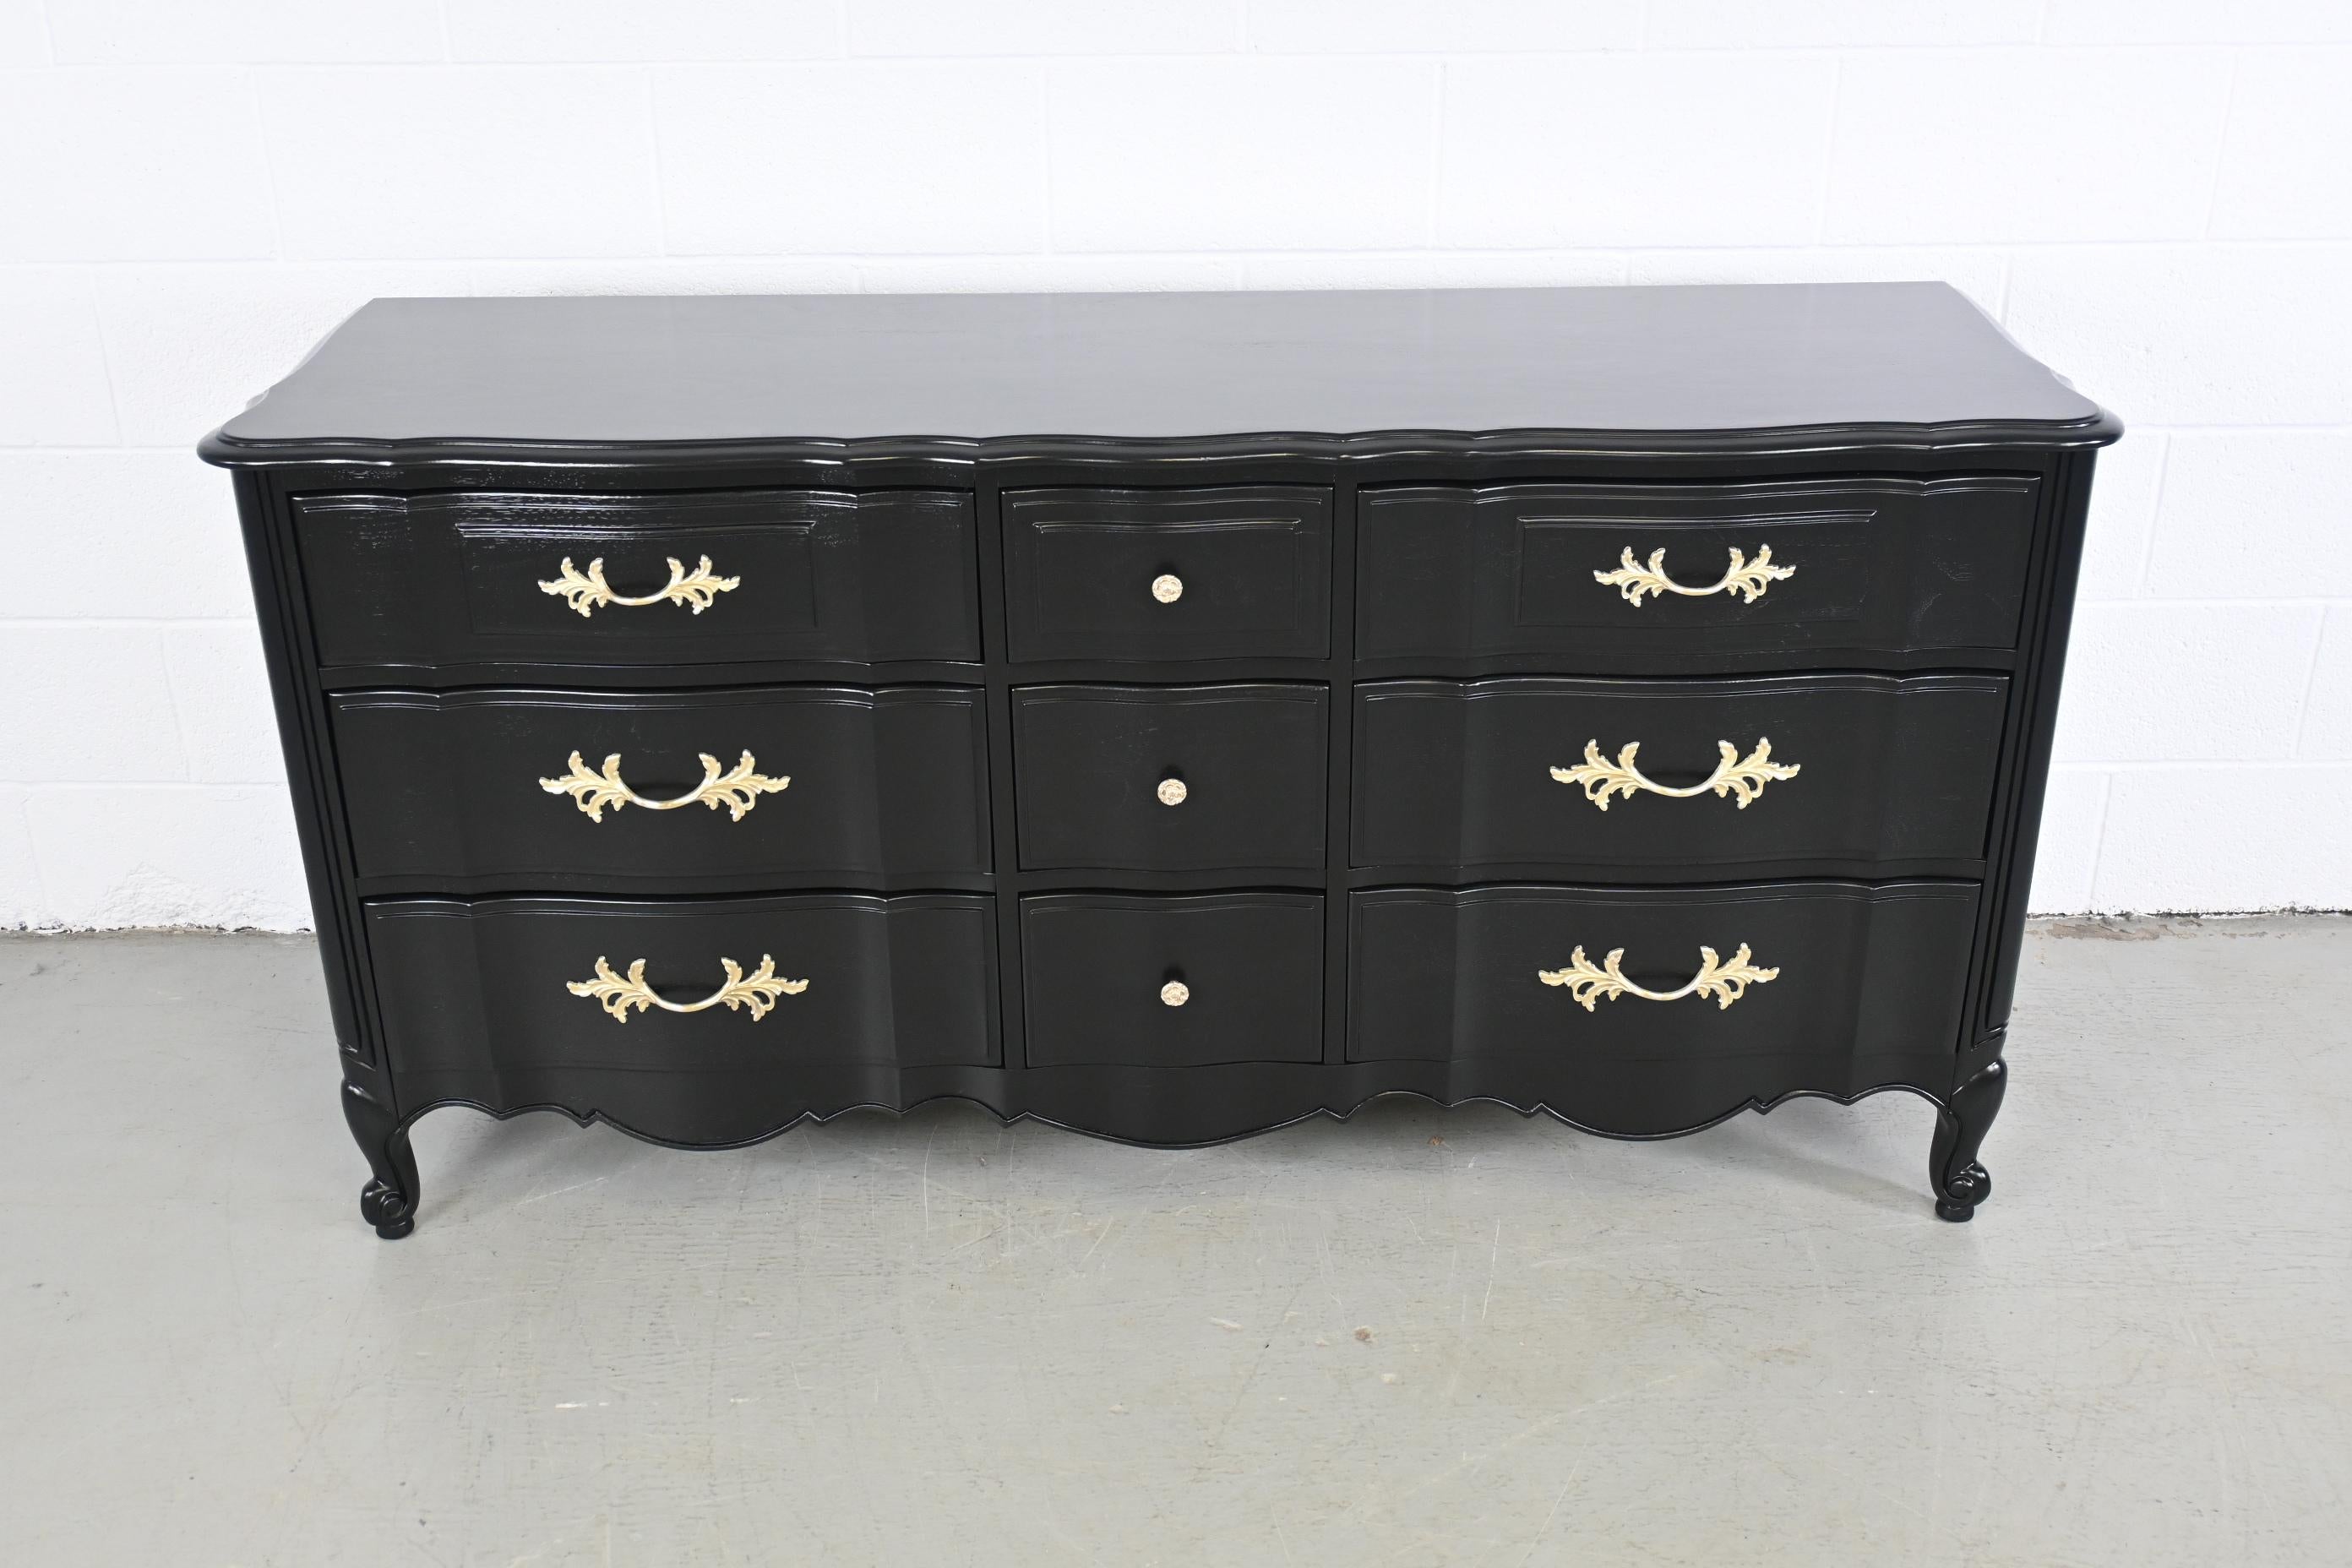 Thomasville French Provincial Black Lacquered Nine-Drawer Dresser

Thomasville, USA, 1990s

63.5